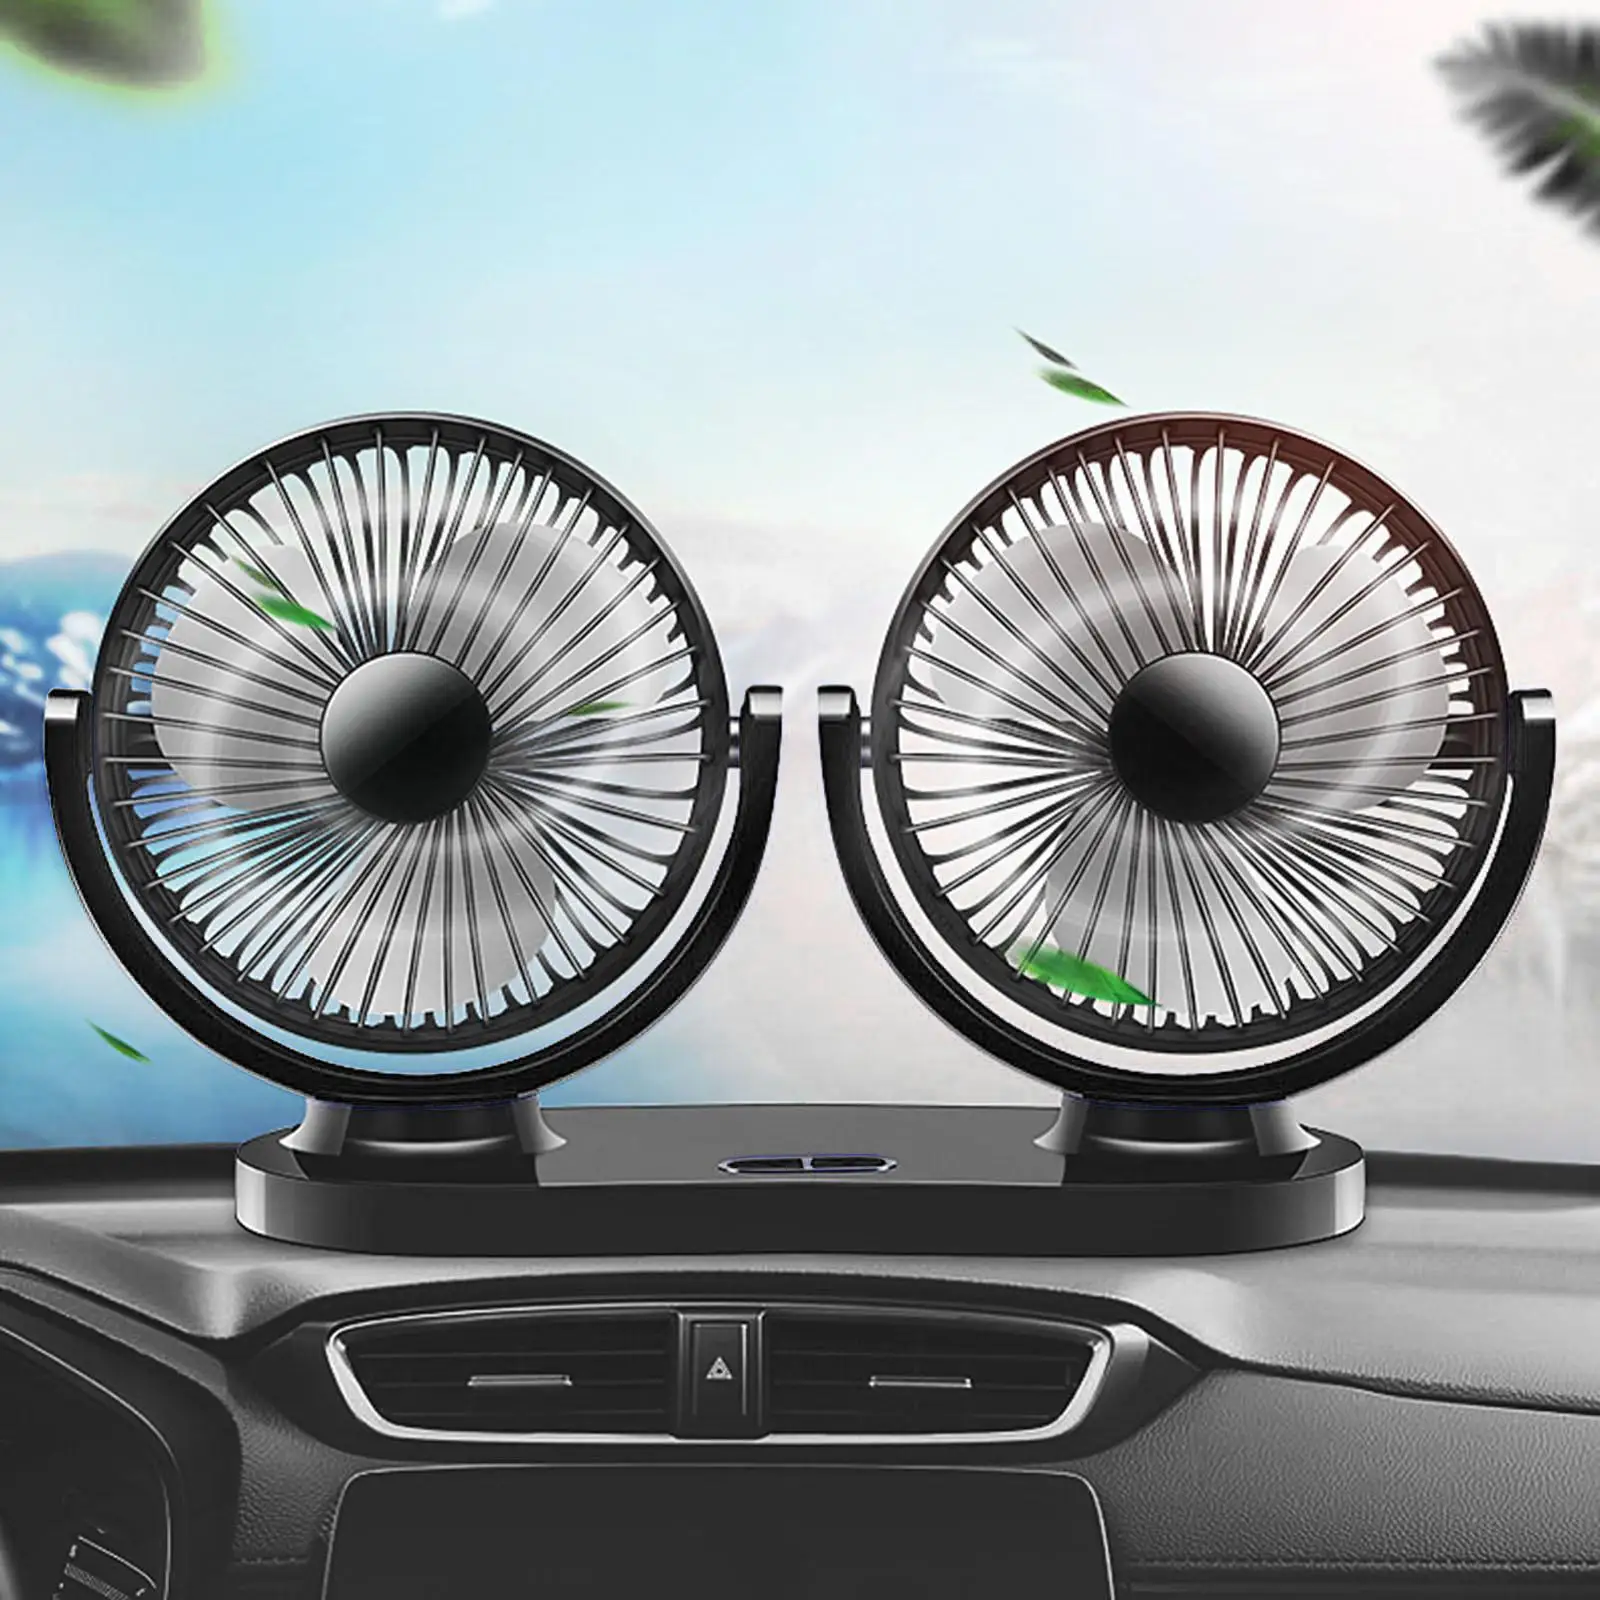 Electric Car Cooling Fan Low Noise 3 Speed Levels Dual Head Fit for SUV RV